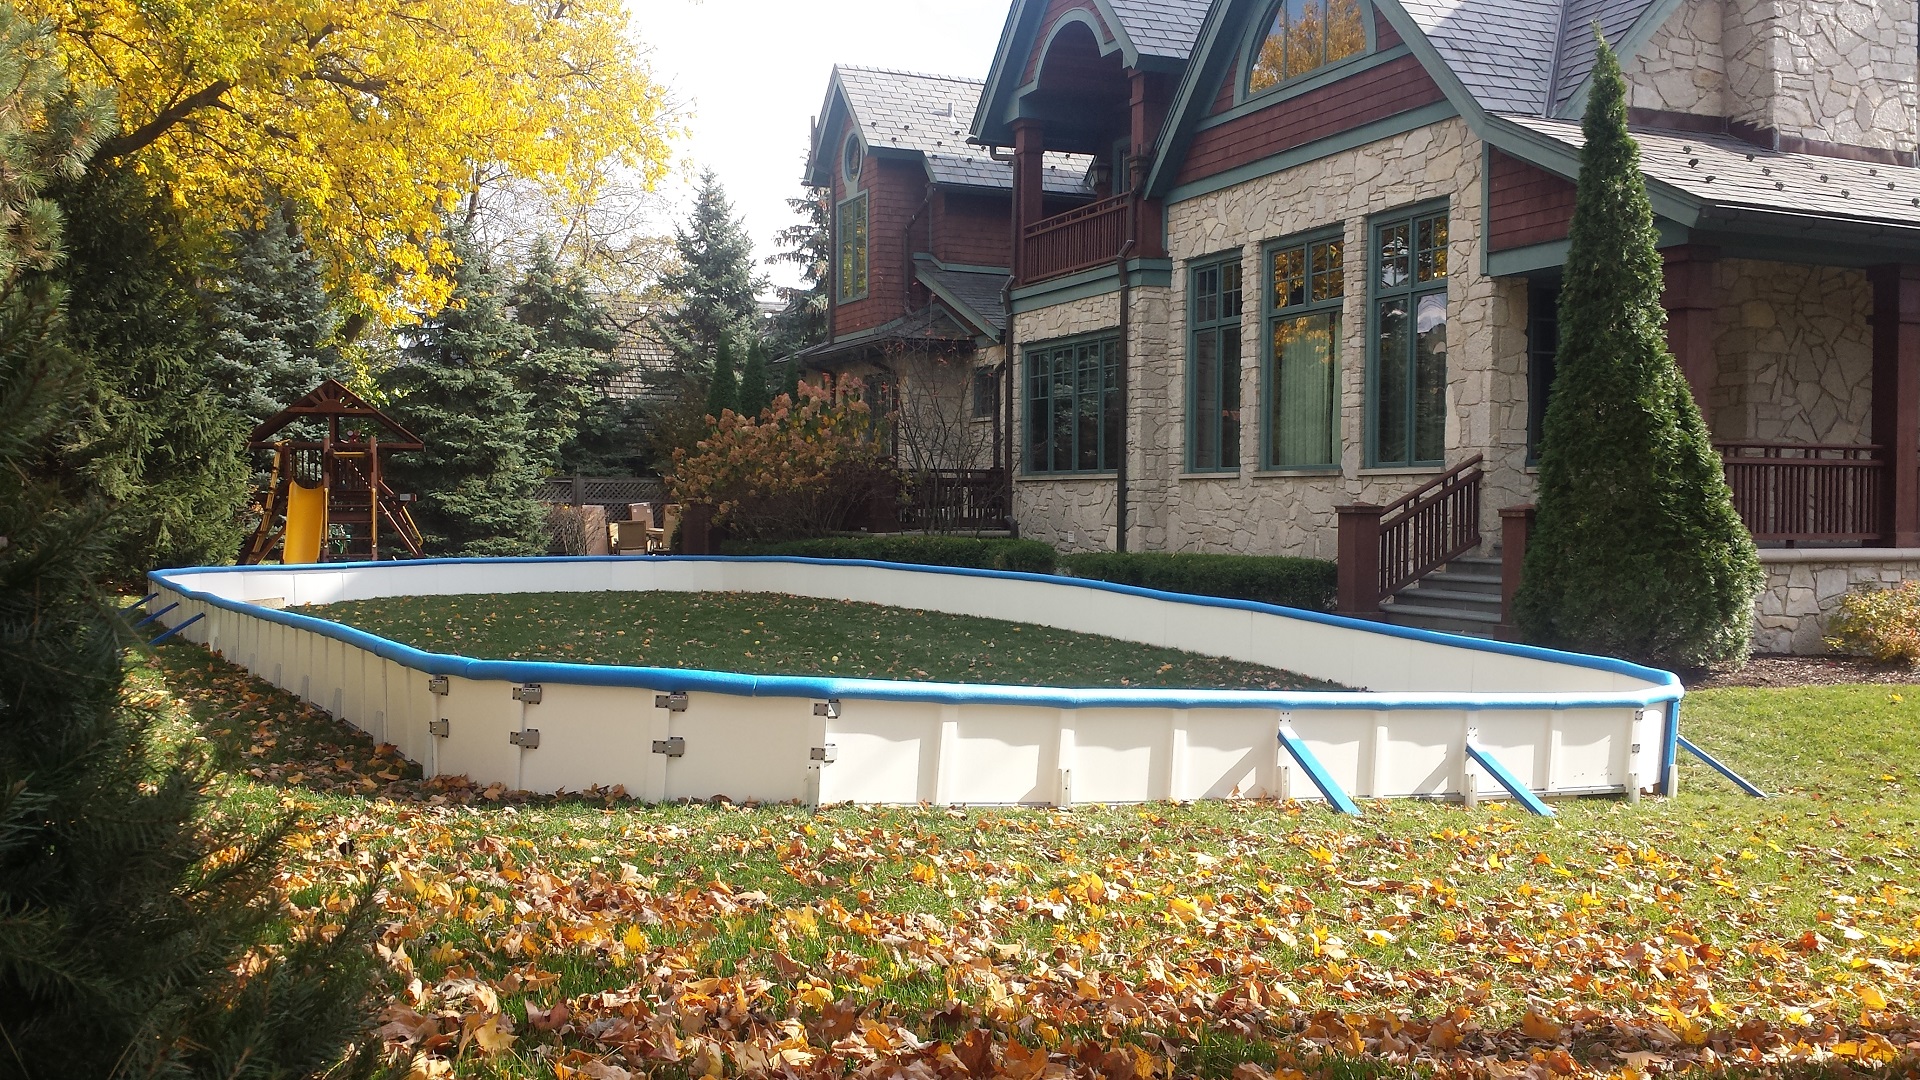 Backyard rink kits with deluxe poly-steel hockey boards